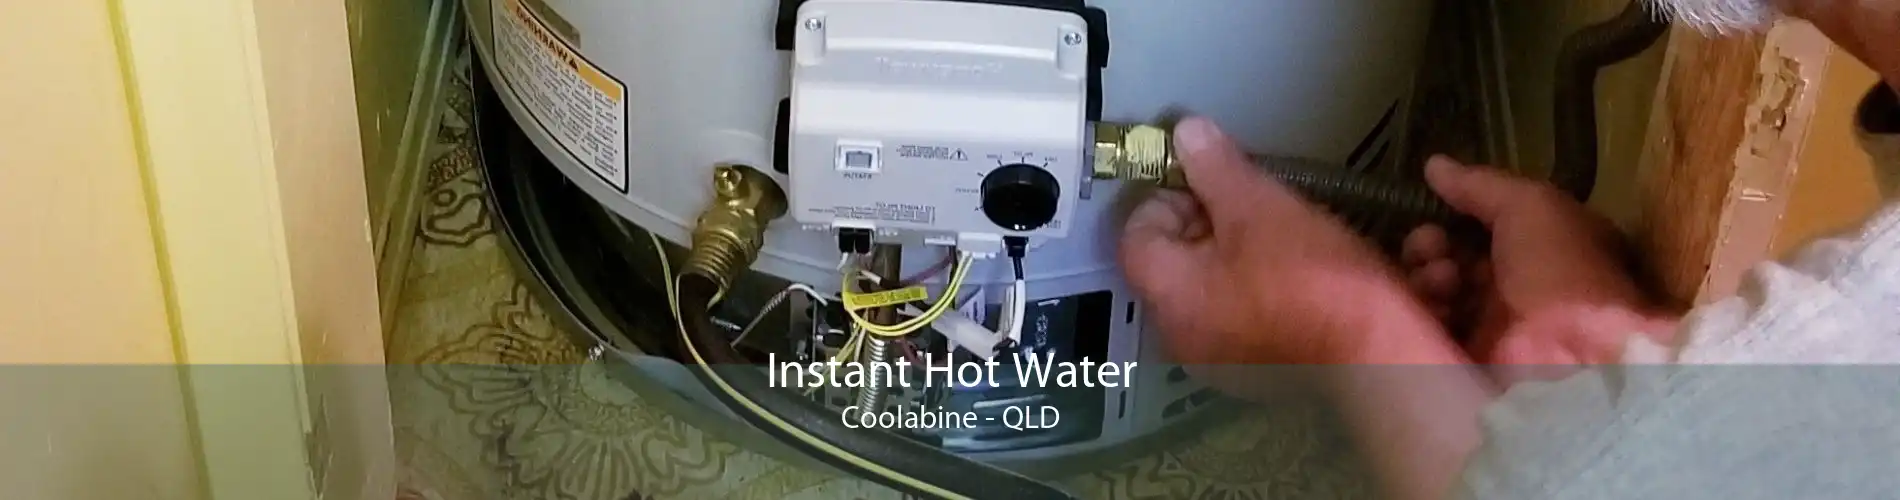 Instant Hot Water Coolabine - QLD